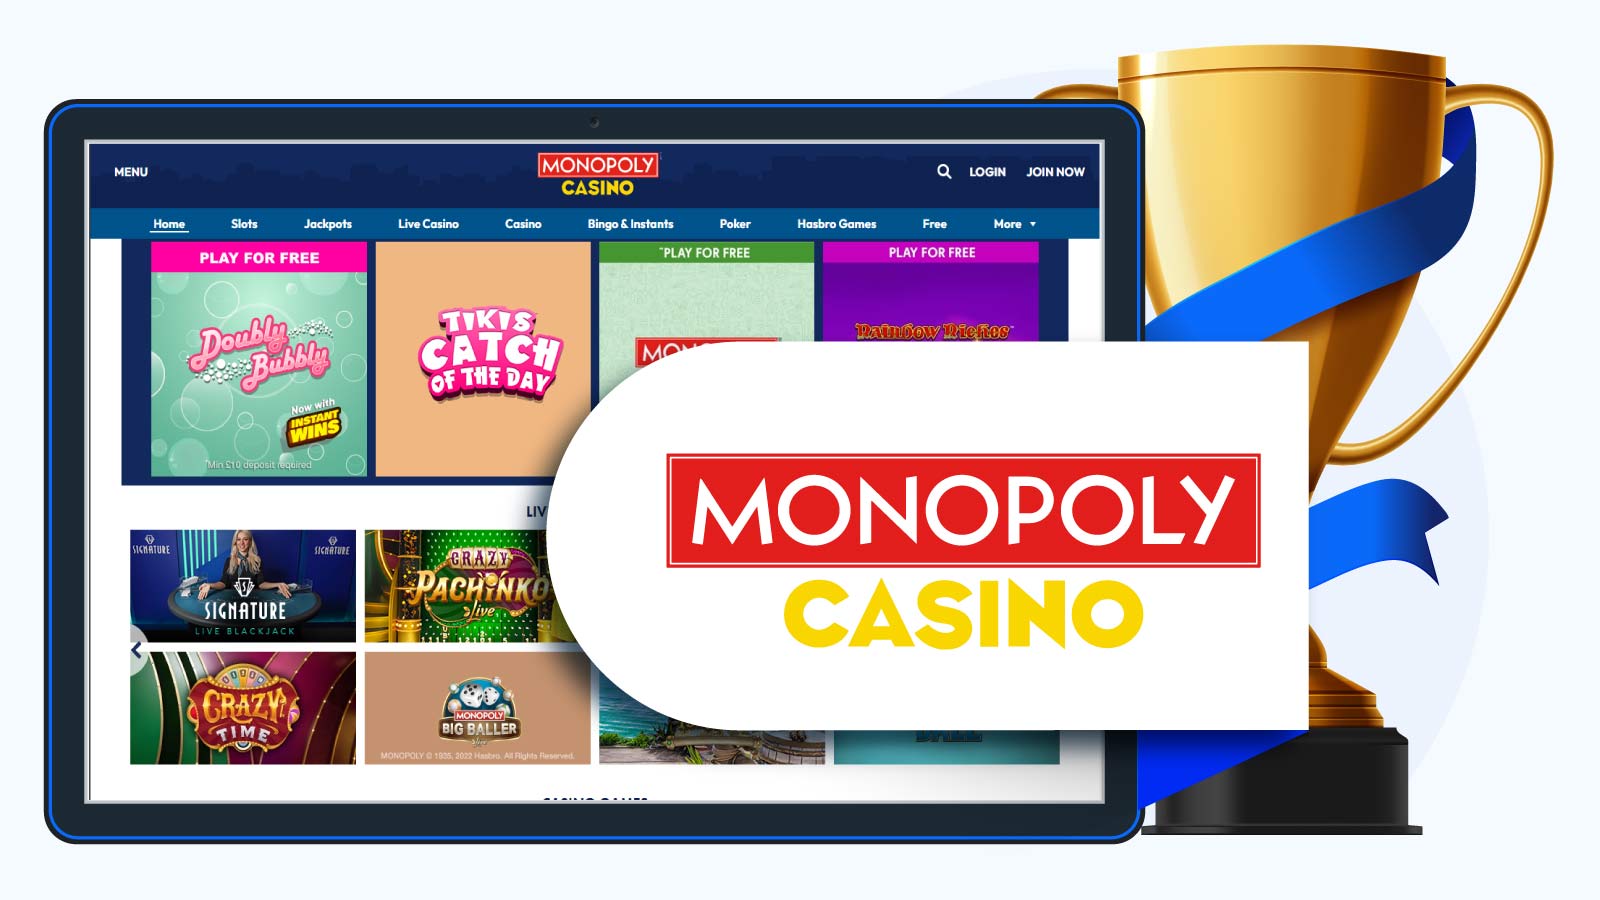 Monopoly Casino Get 30 Wager-free Spins – Our Team’s Pick for the Best UK Casino Bonus